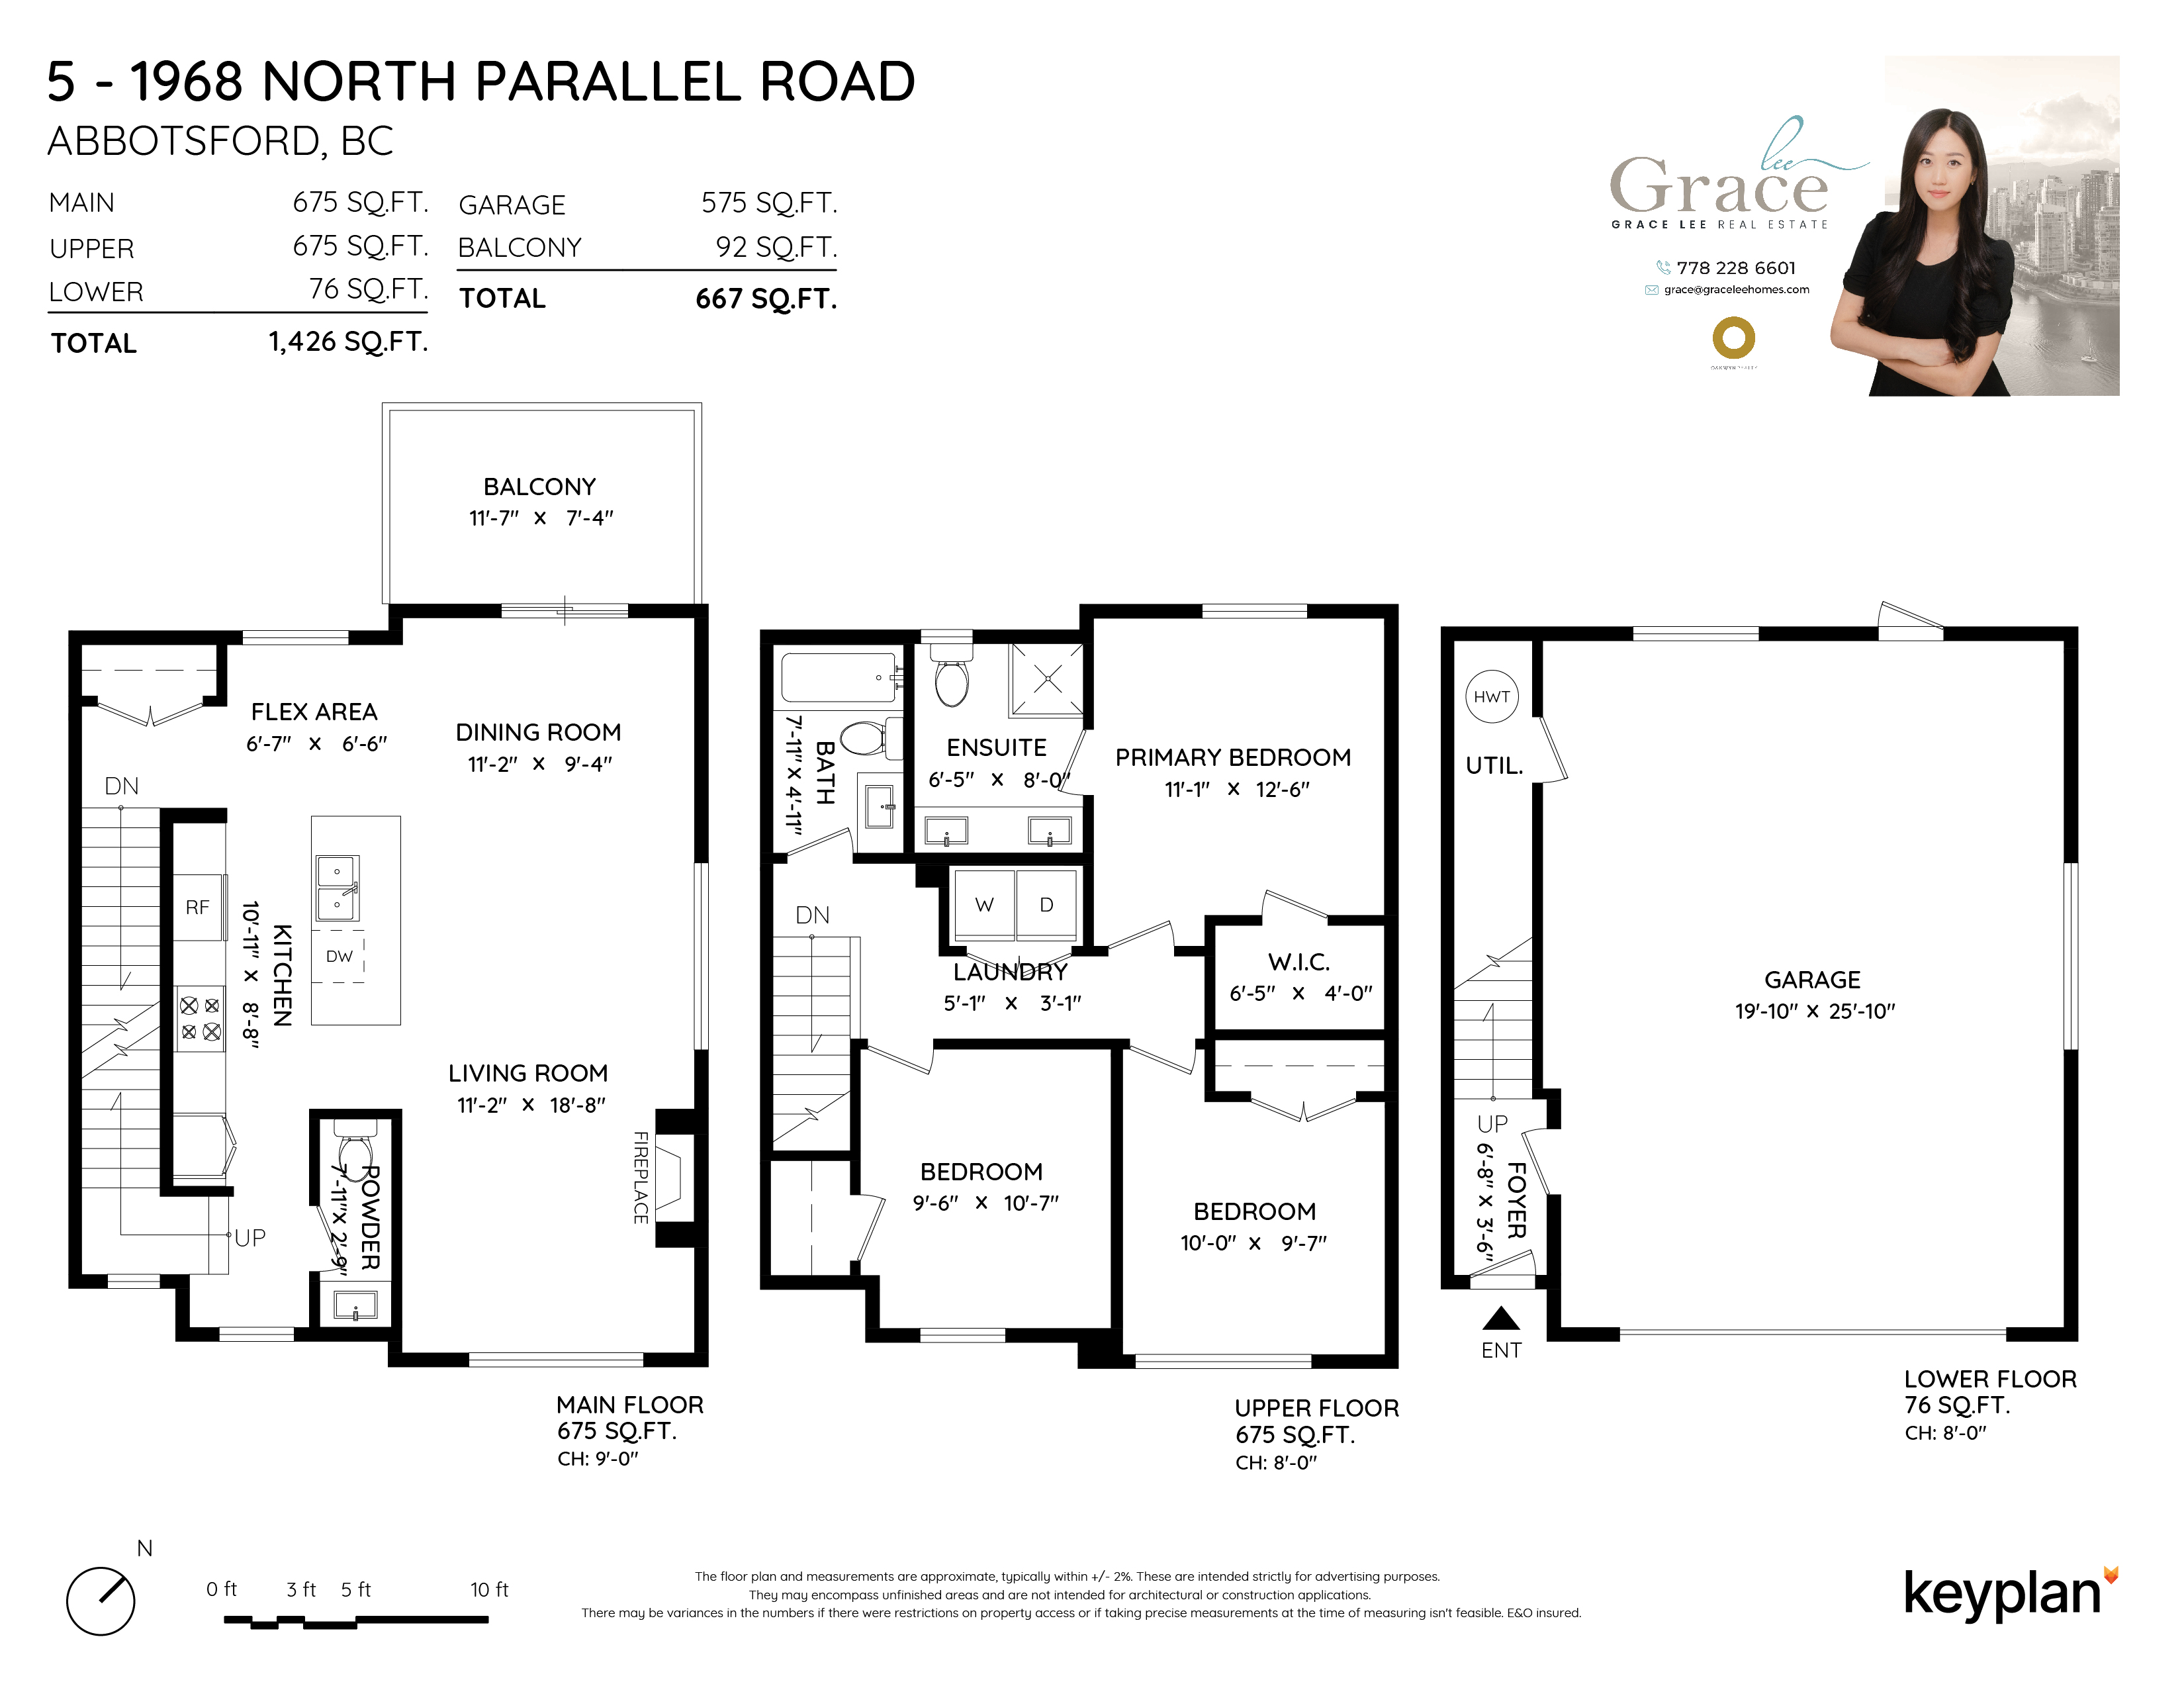 Grace Lee - Unit 5 - 1968 North Parallel Road, Abbotsford, BC, Canada V3G 0H1 | Floor Plan 1